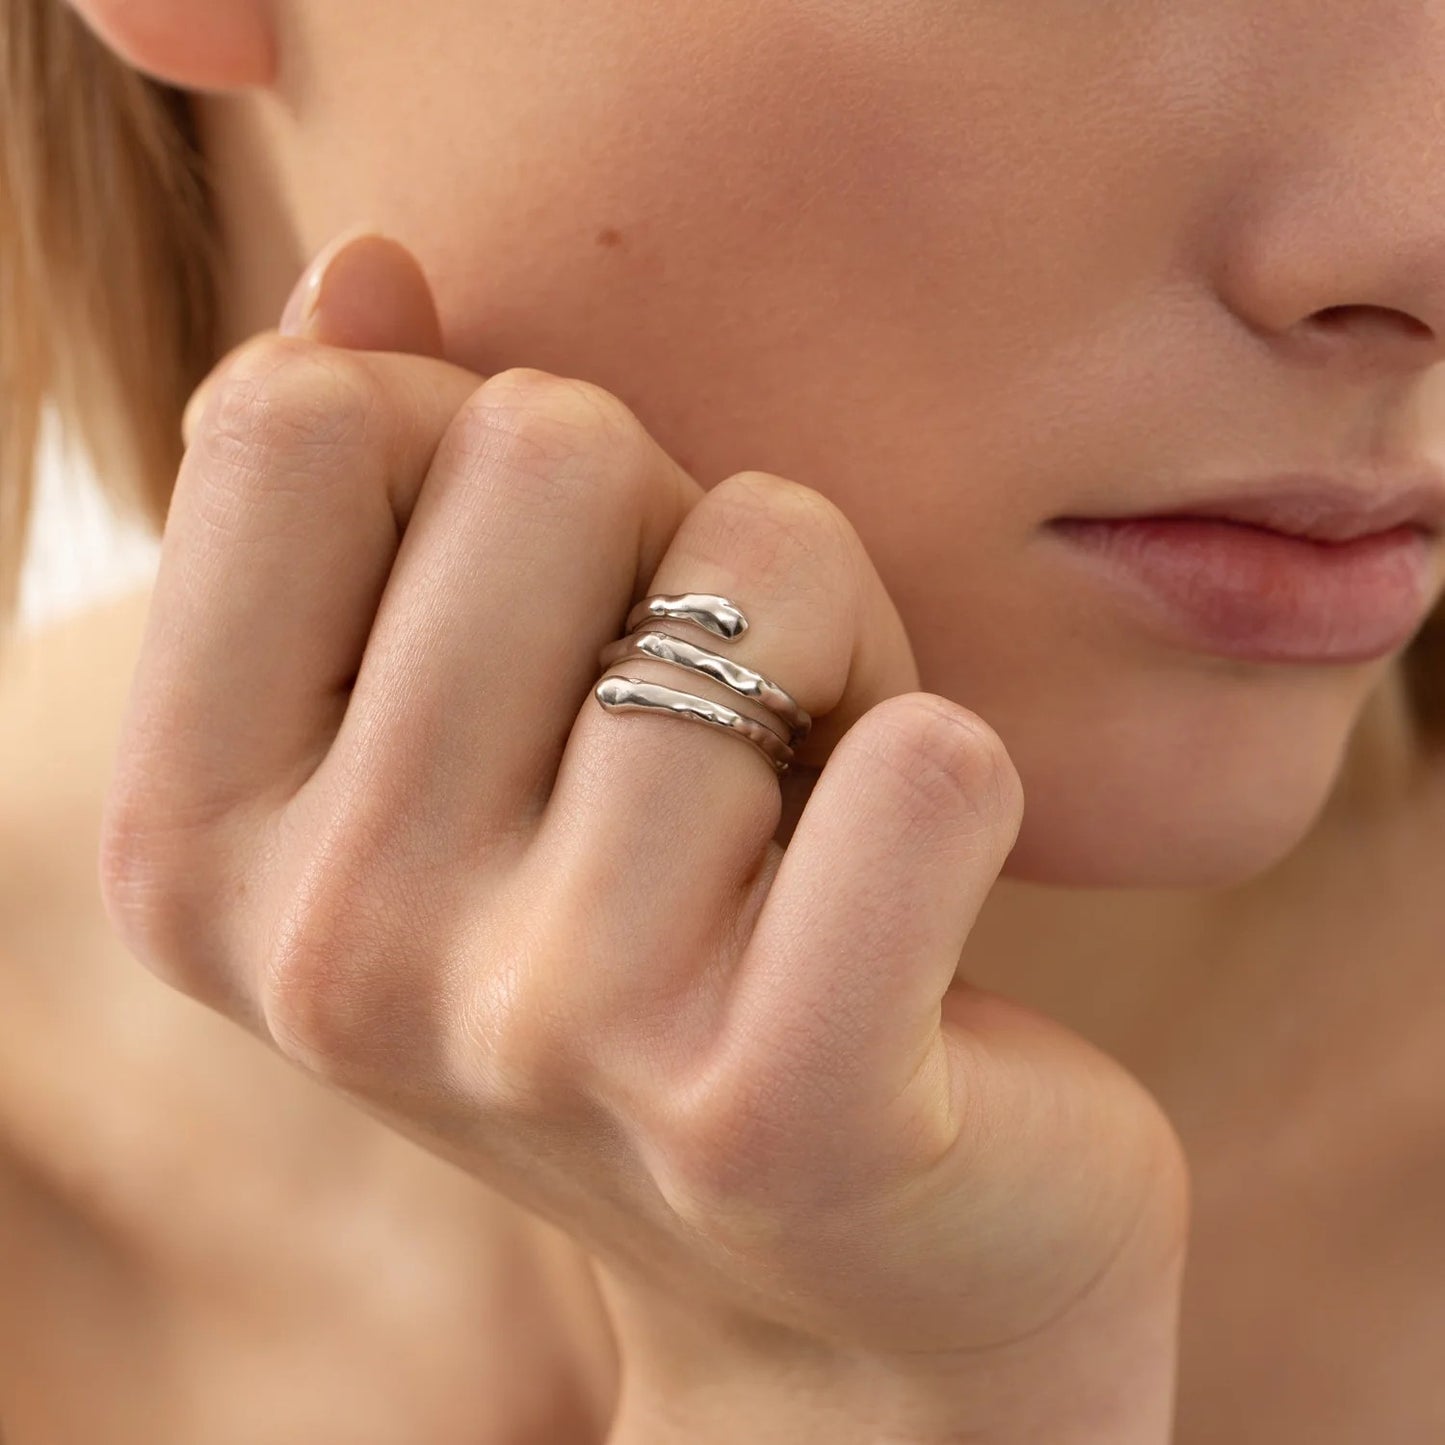 A close-up of a woman's hand wearing Resizable Ring SPIRAL - Silver, made of 925 sterling silver, hypoallergenic, elegant, minimalist, and adjustable in size.